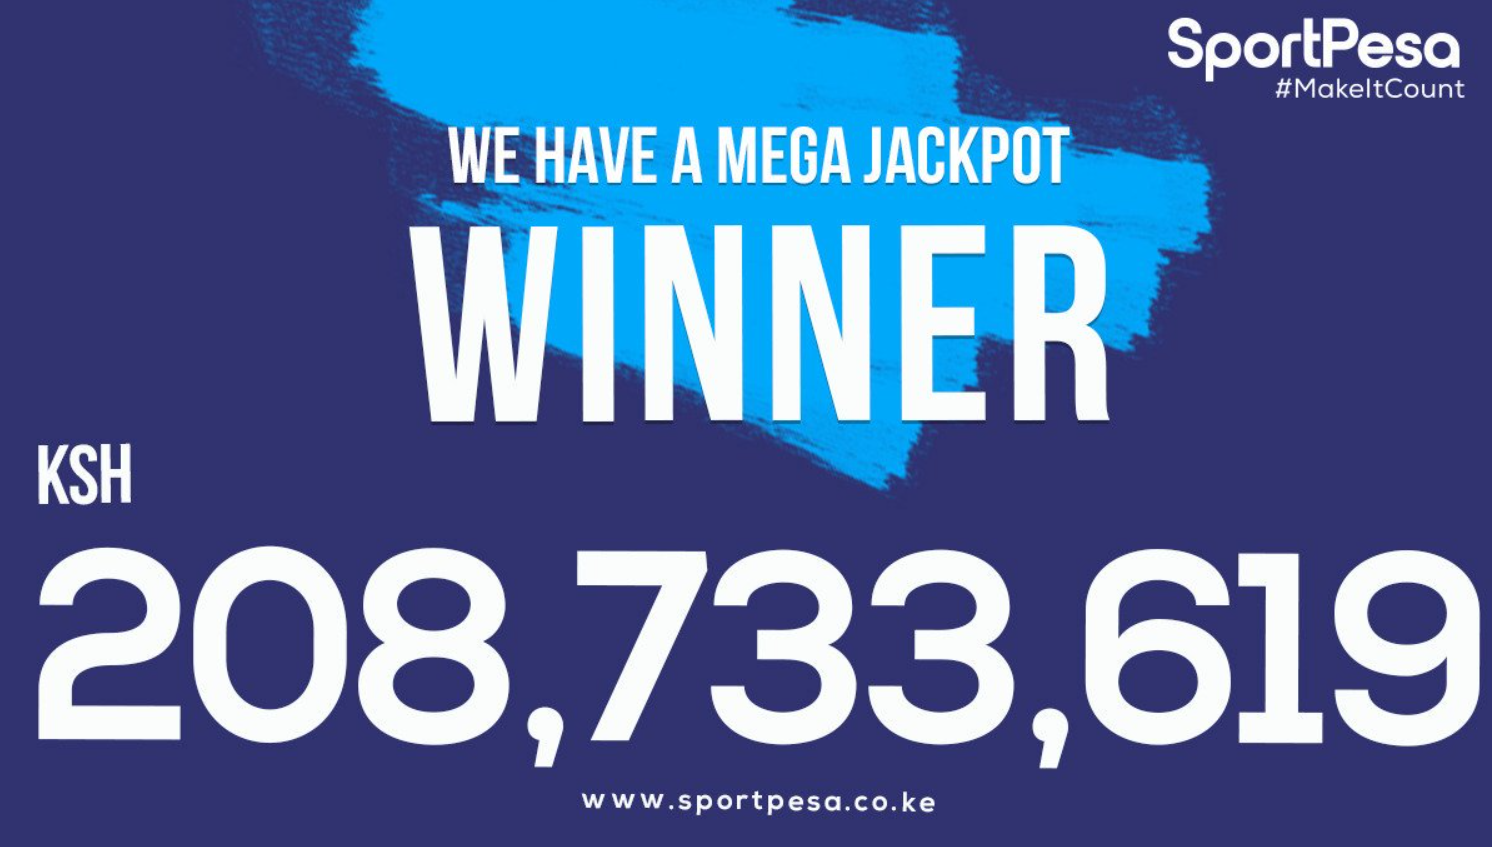 How to place bets for Sportpesa jackpot